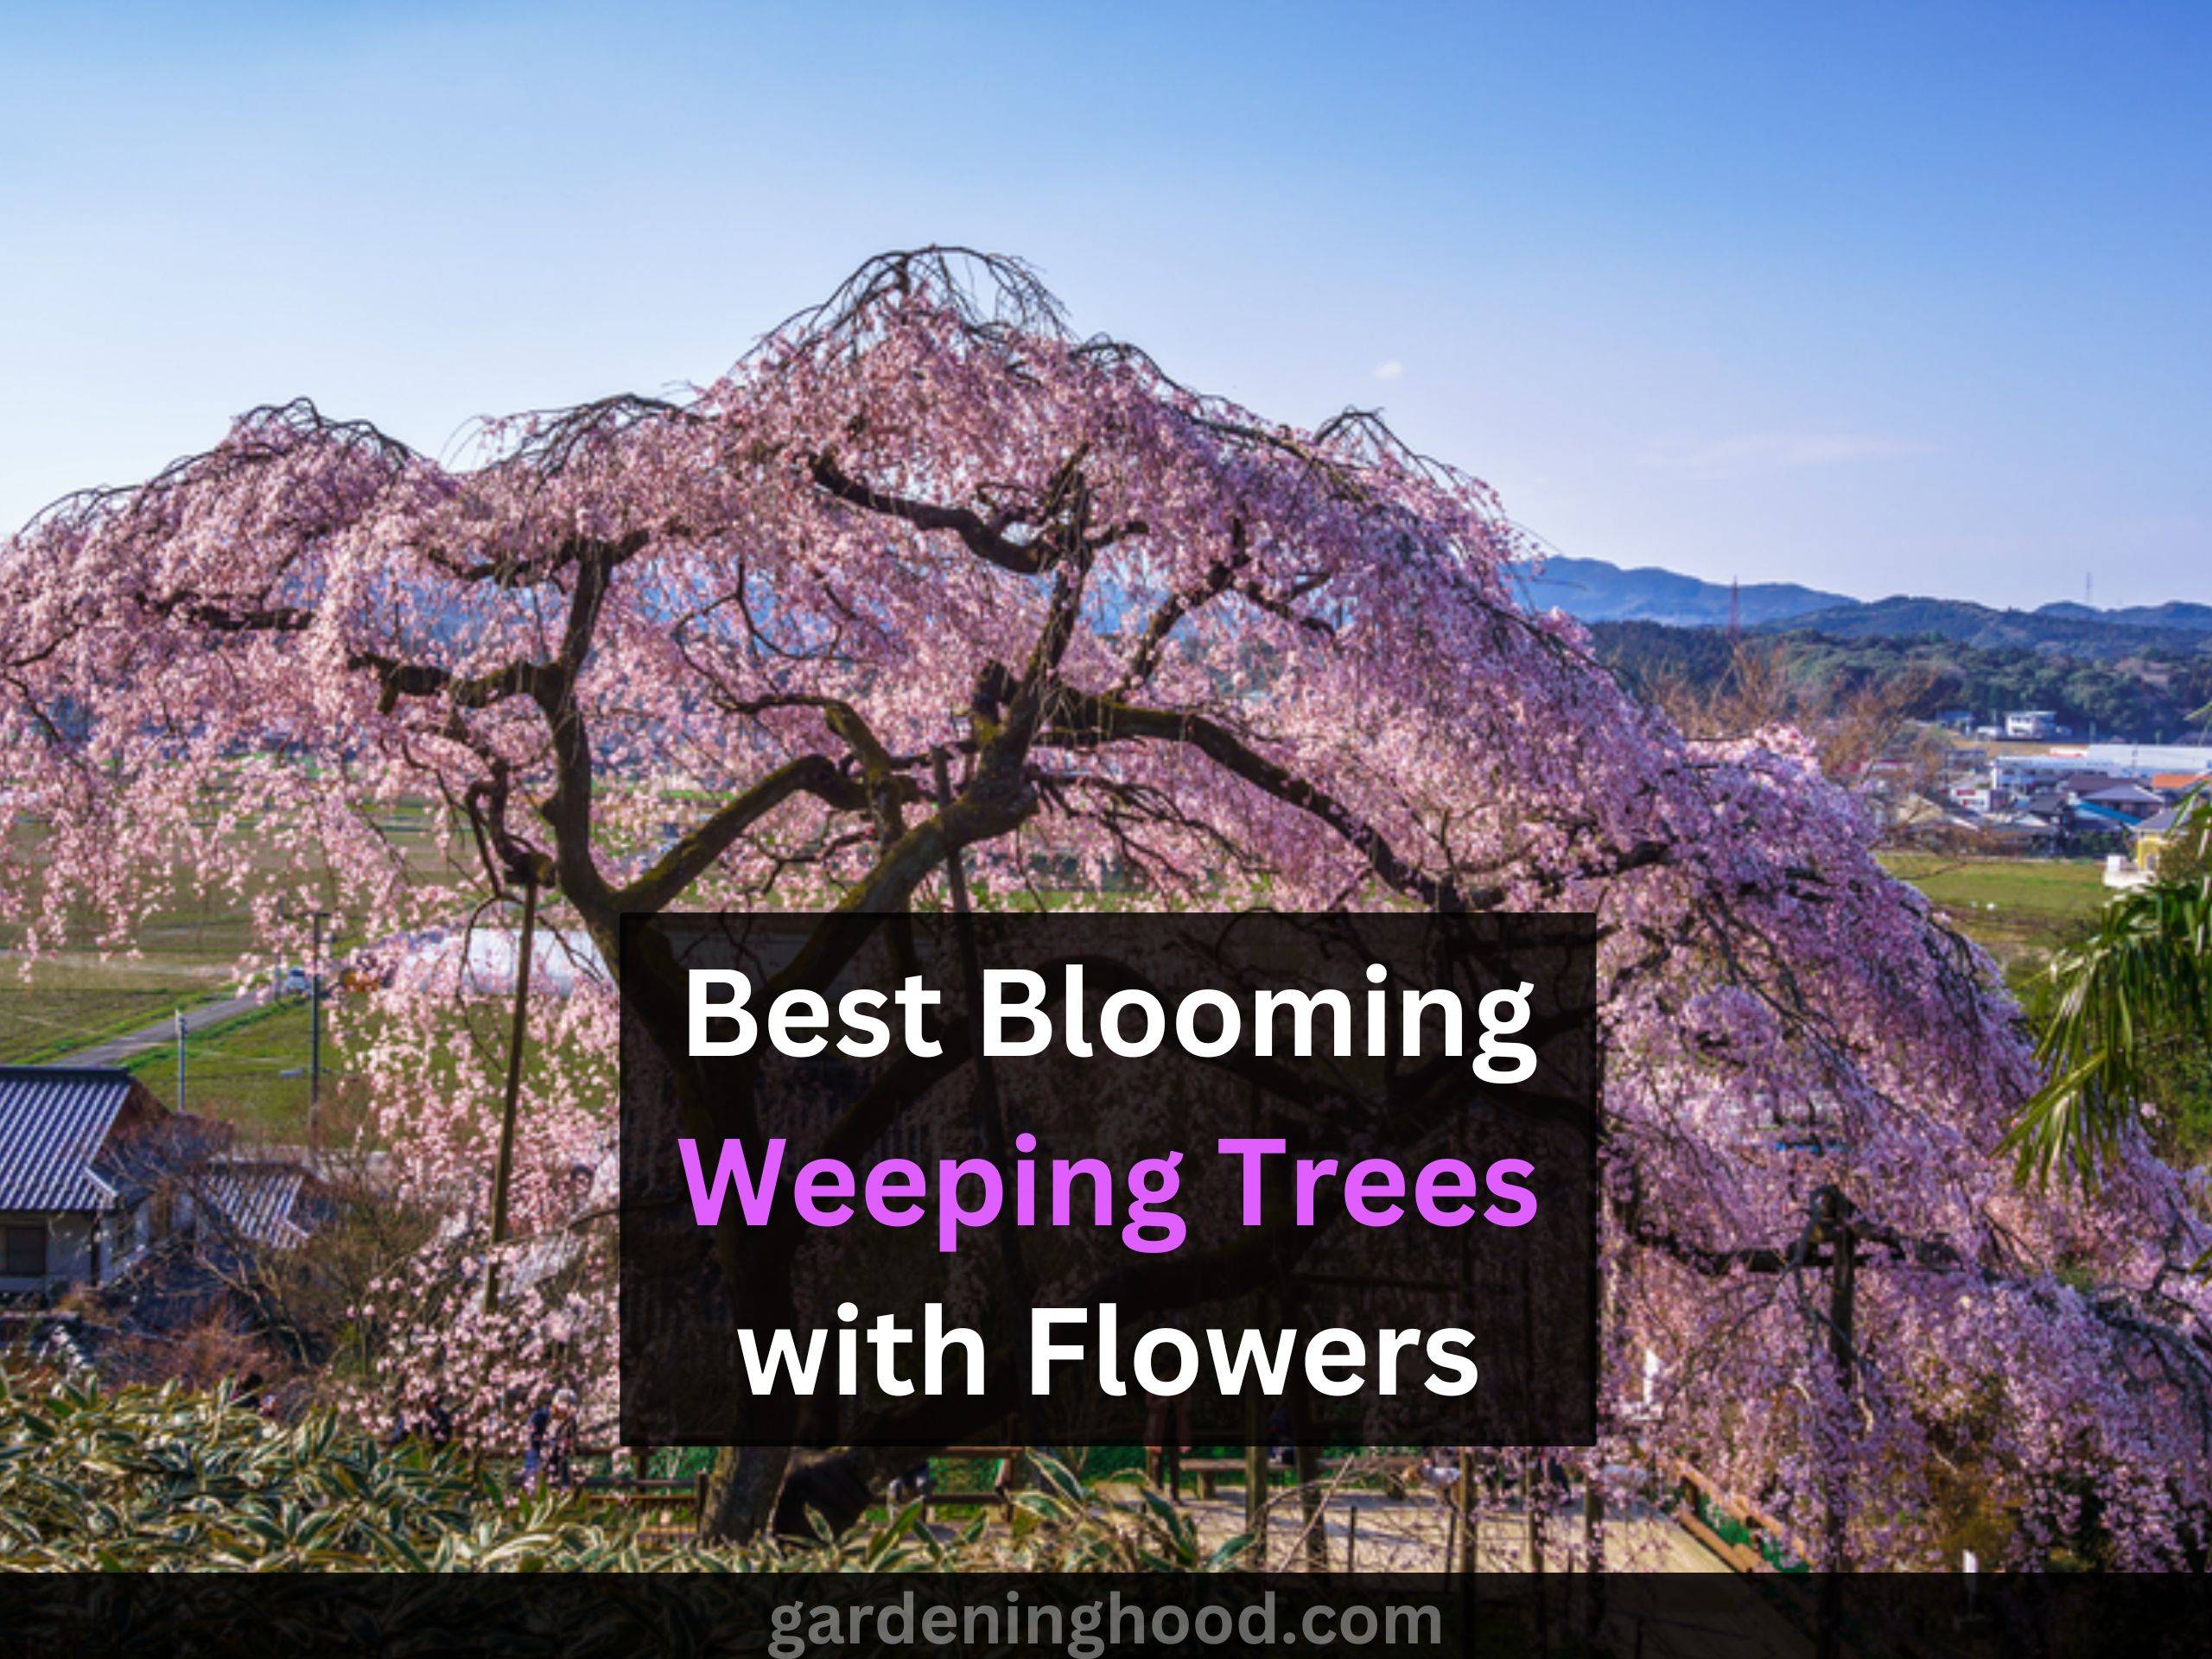 Best Blooming Weeping Trees with Flowers